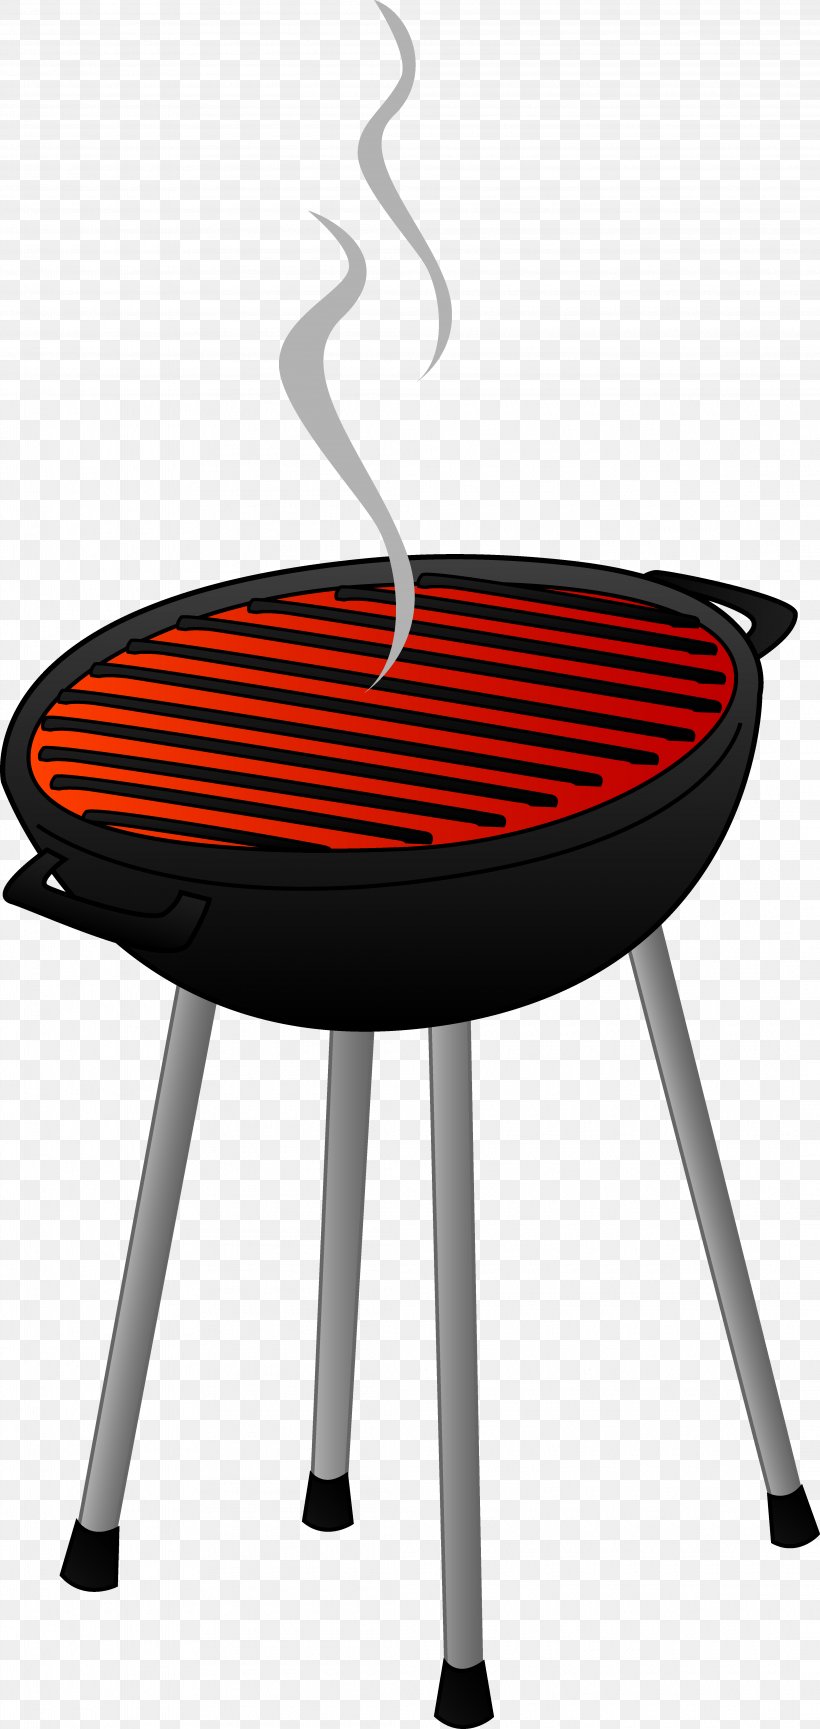 Barbecue Sauce Grilling Clip Art, PNG, 4235x8932px, Barbecue, Barbecue Sauce, Barbecuesmoker, Big Green Egg, Chair Download Free